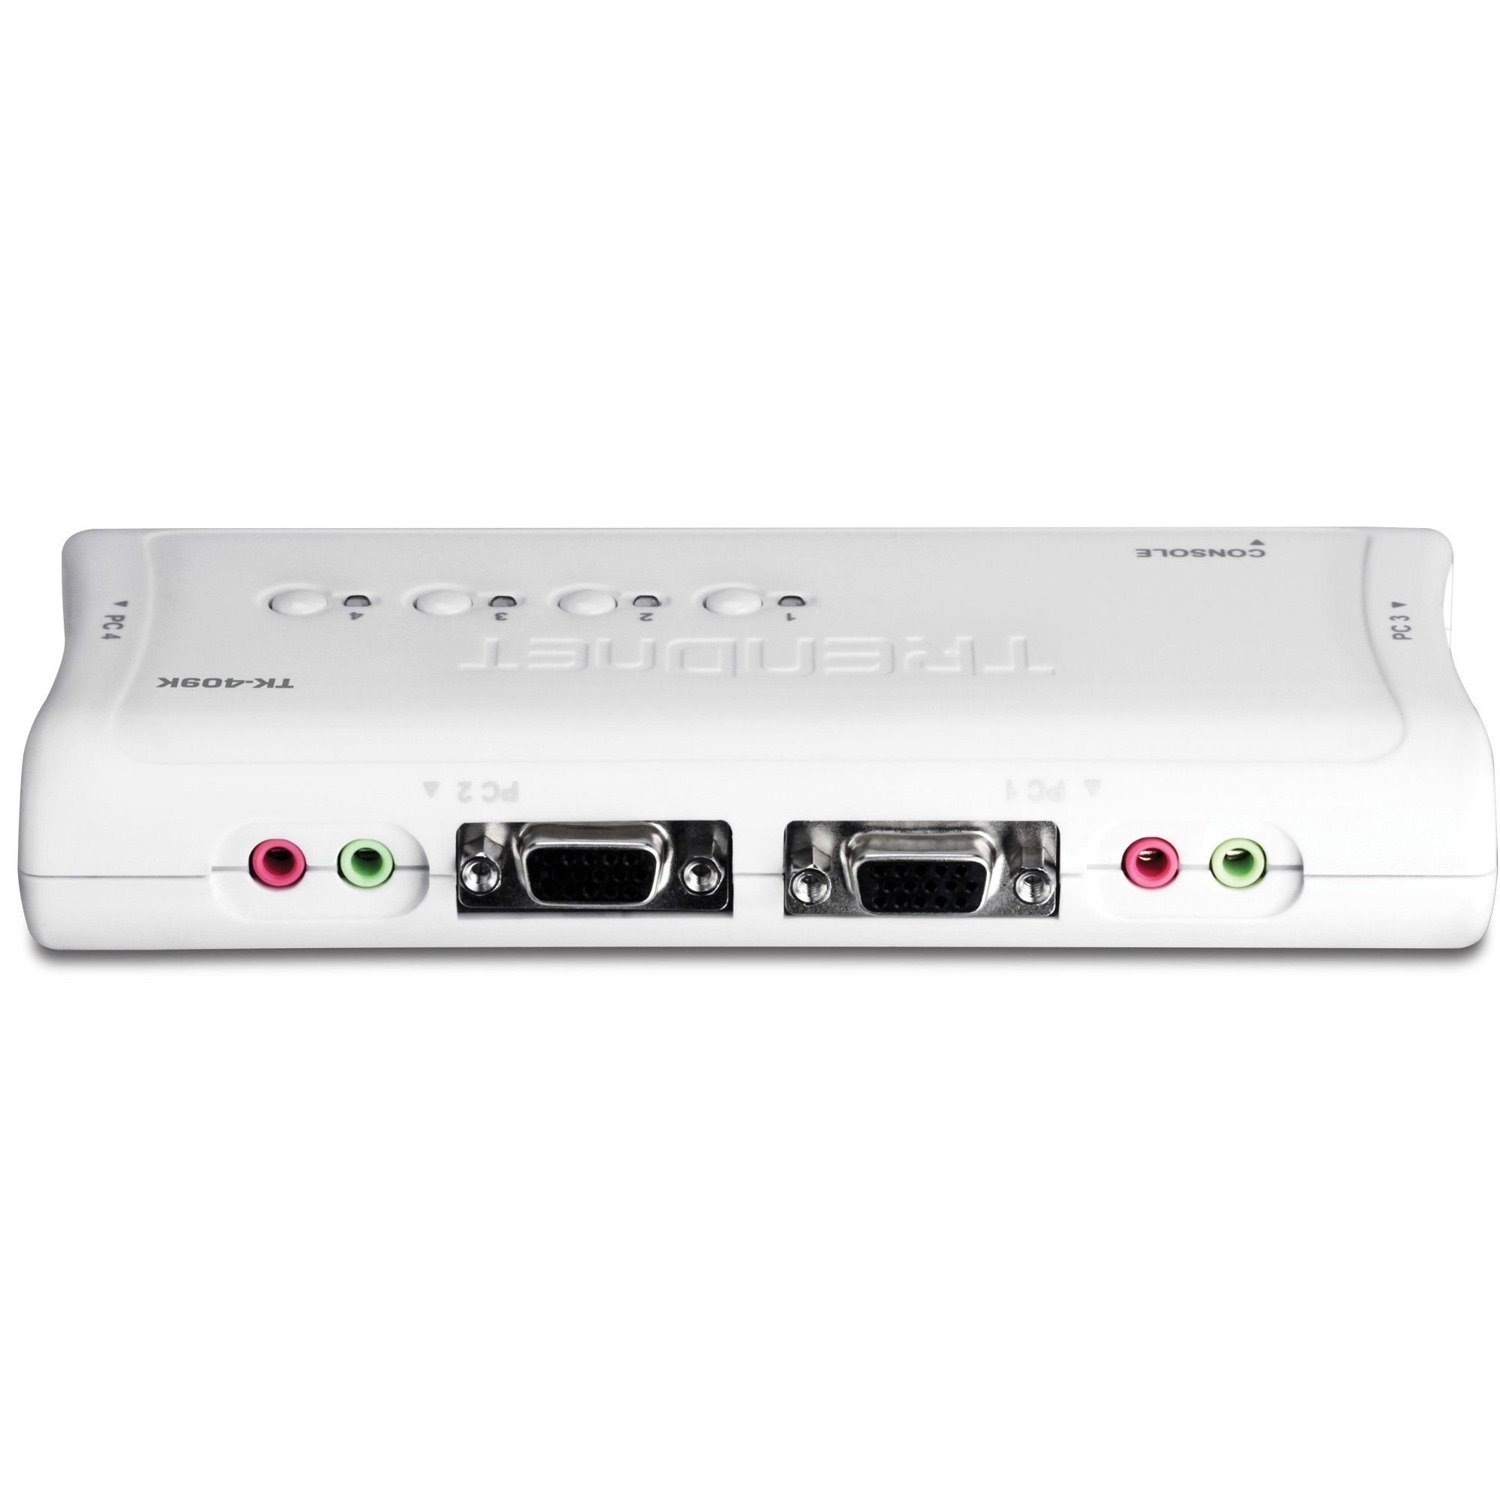 TRENDnet 4-Port USB KVM Switch and Cable Kit With Audio, Manage 4 Computers, USB Switch, Windows, Linux, Auto-Scan, Plug And Play, Hot Pluggable, 2048 x 1536 VGA Resolution, White, TK-409K